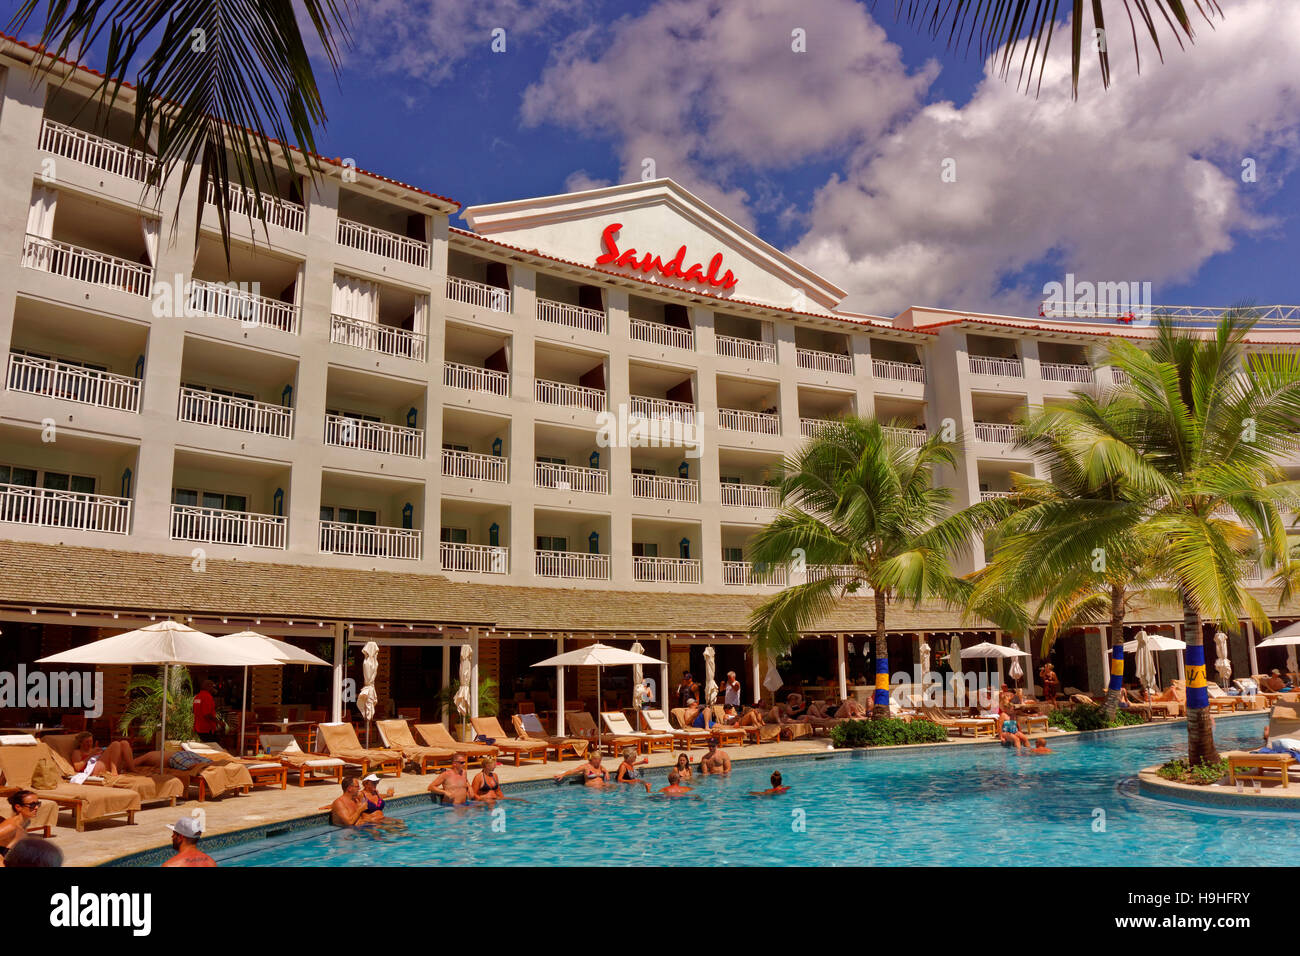 Main building and pool of the Sandals Resort Hotel, St. Lawrence Gap, South Coast, Barbados, Caribbean. Stock Photo